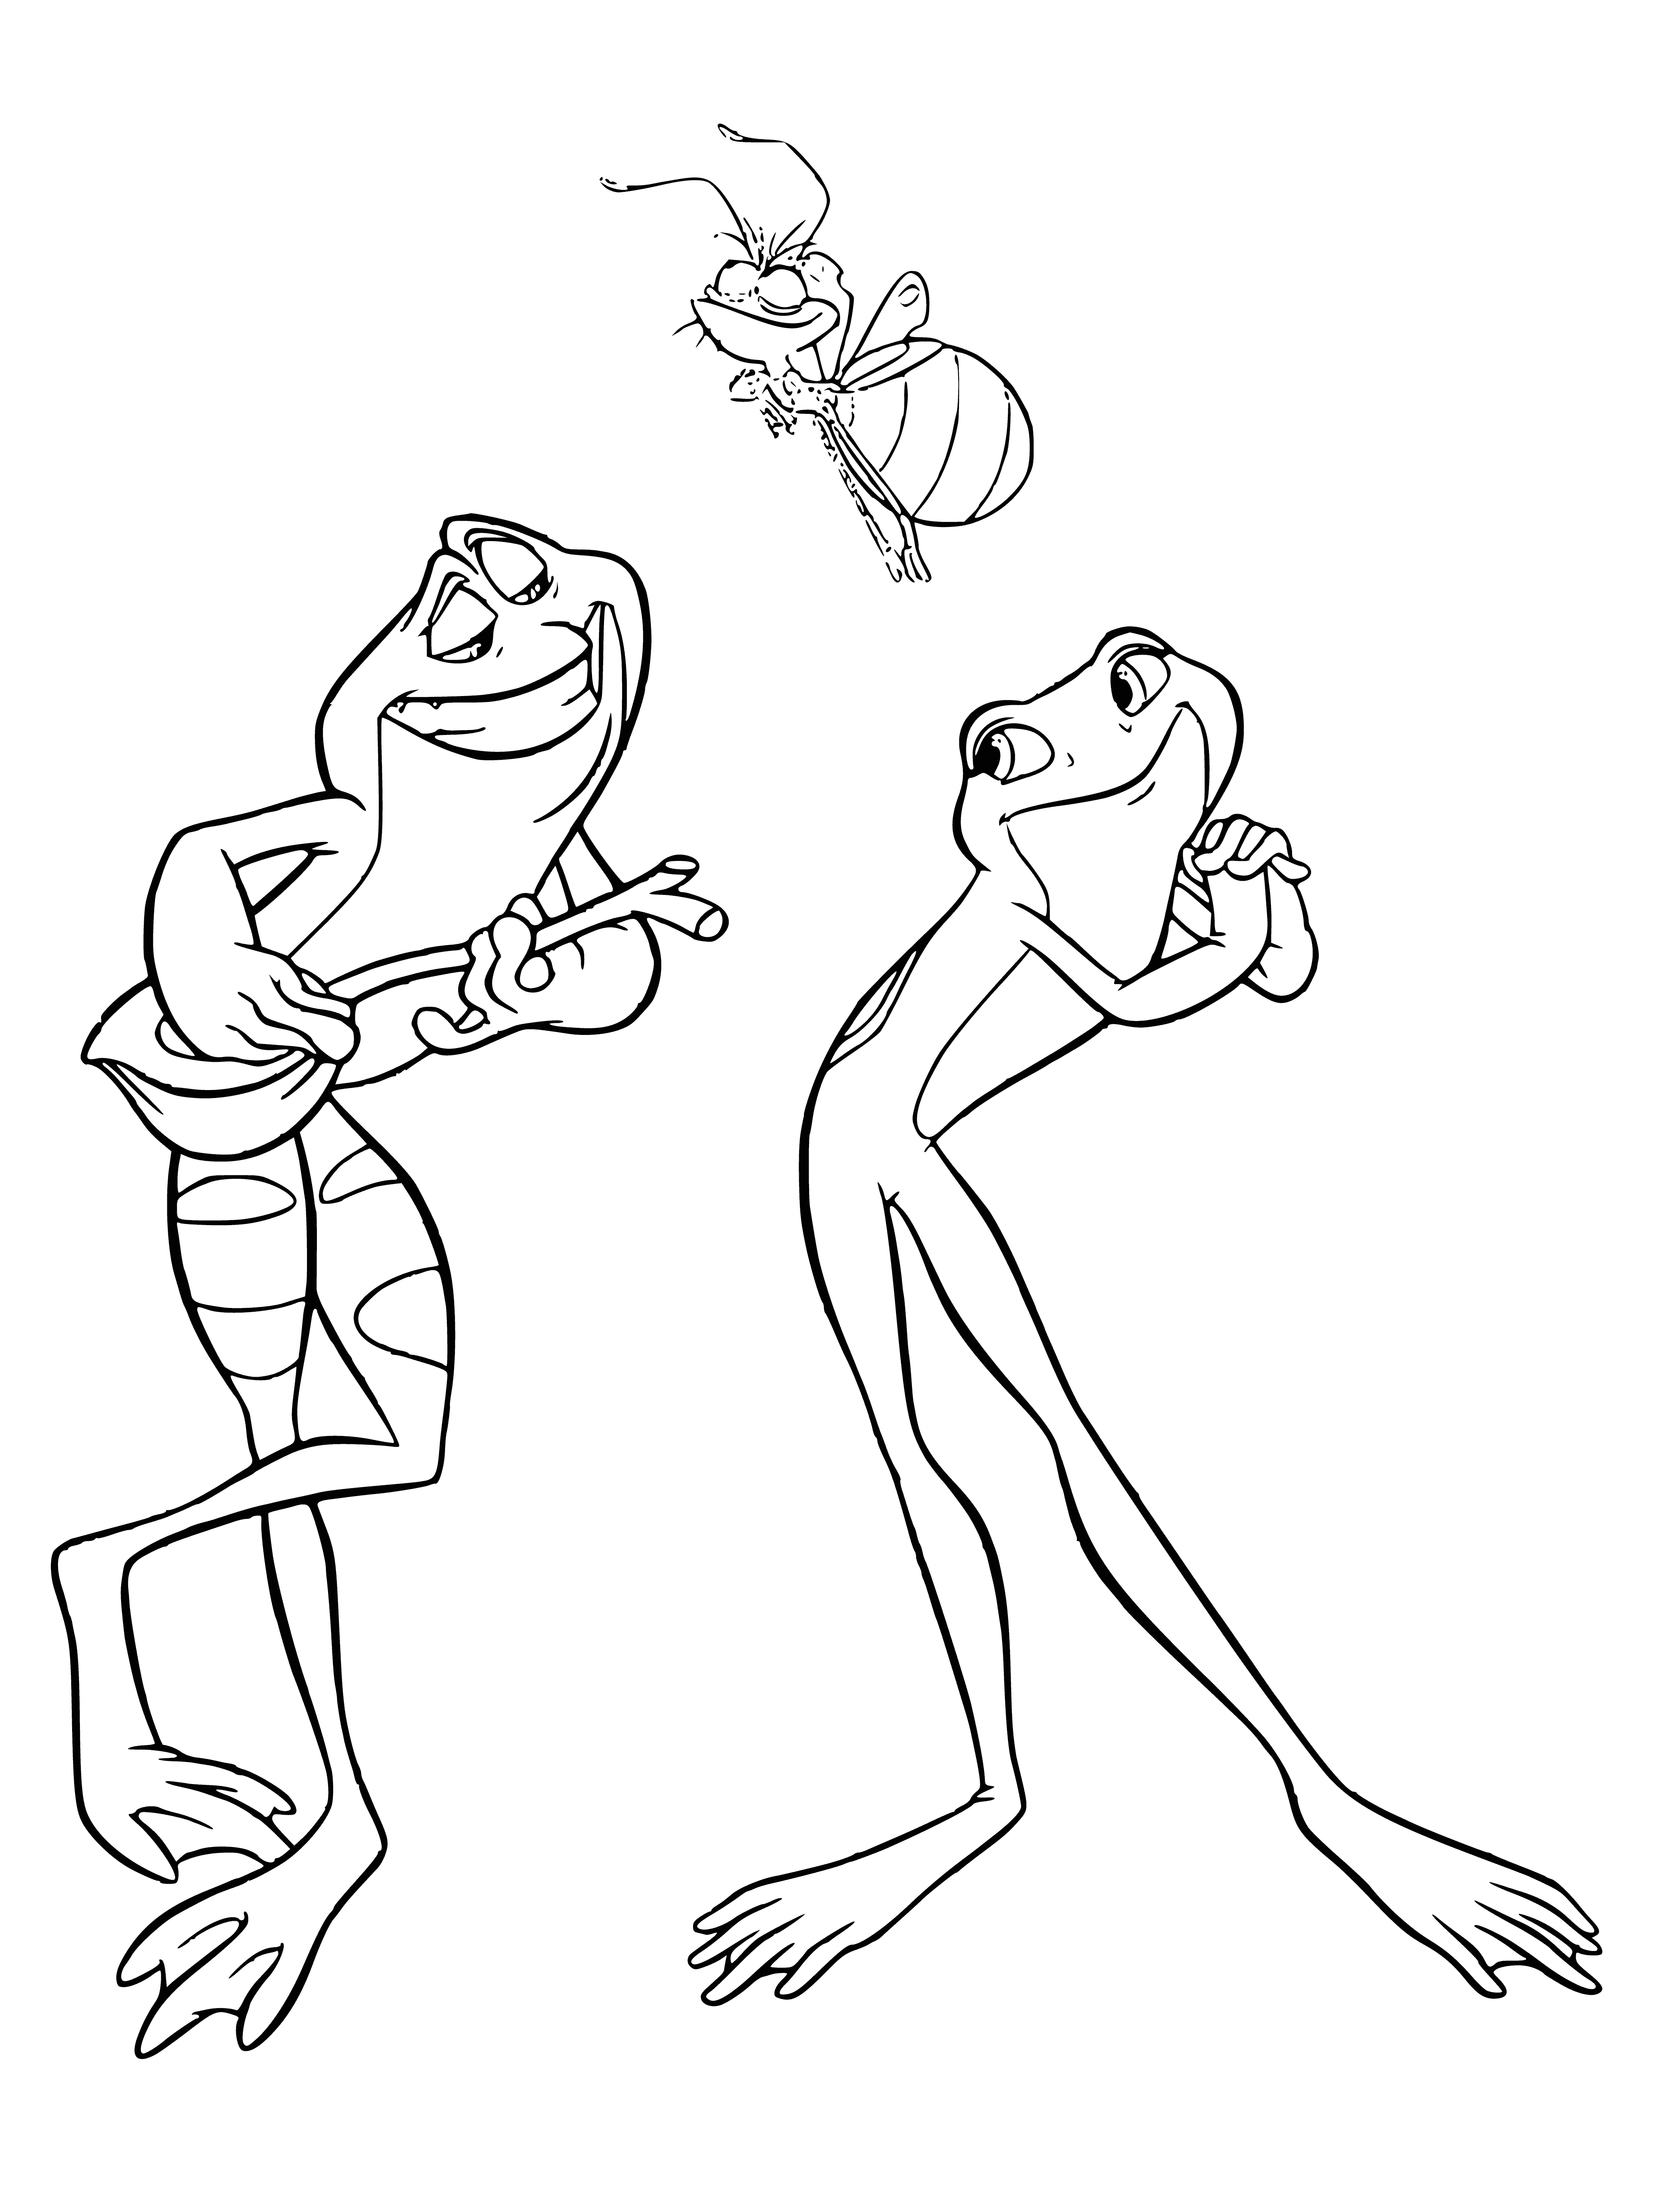 Frogs and firefly coloring page